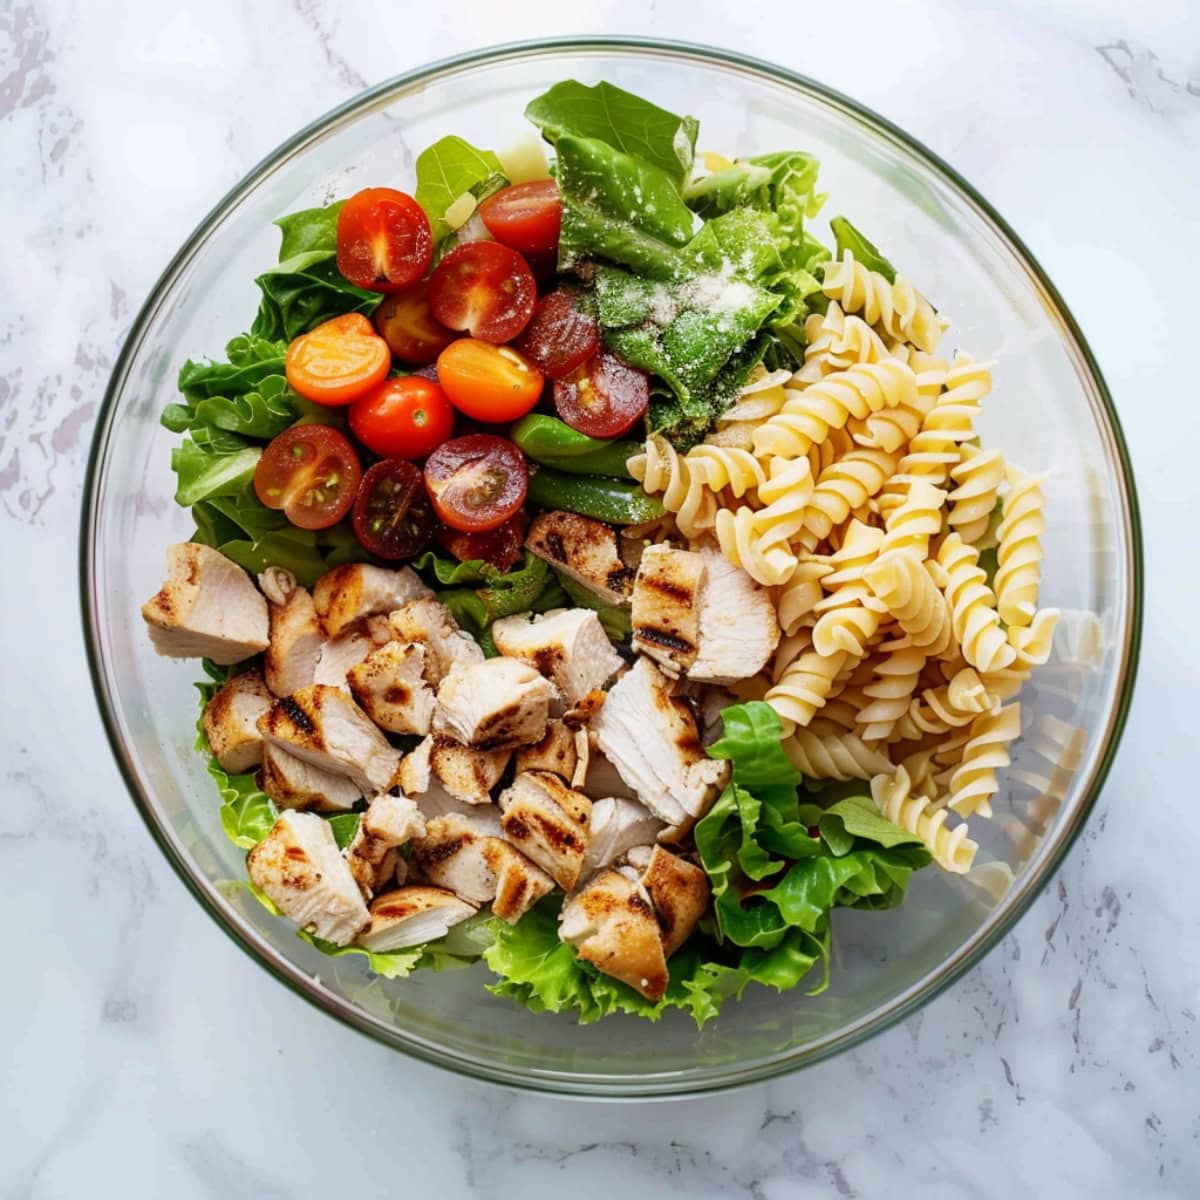 A glass bowl of grilled diced chicken, rotini pasta, cherry tomatoes and lettuce.